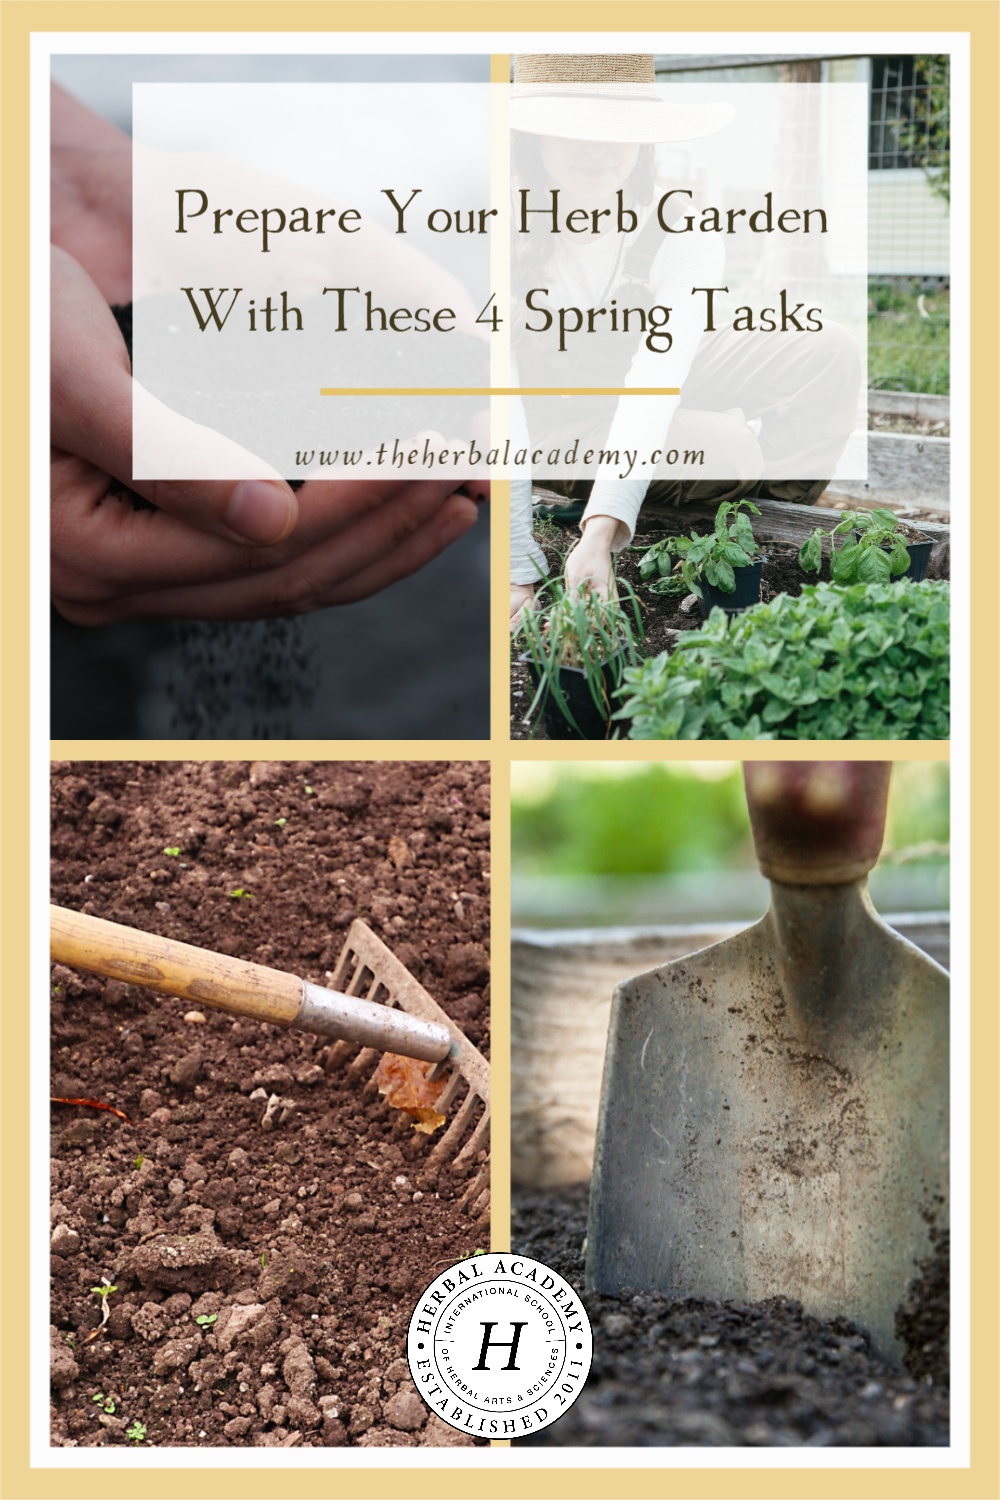 Prepare Your Herb Garden With These 4 Spring Tasks | Herbal Academy | By preparing your herb garden for the season with these four spring tasks, you can make your gardening vision a reality.